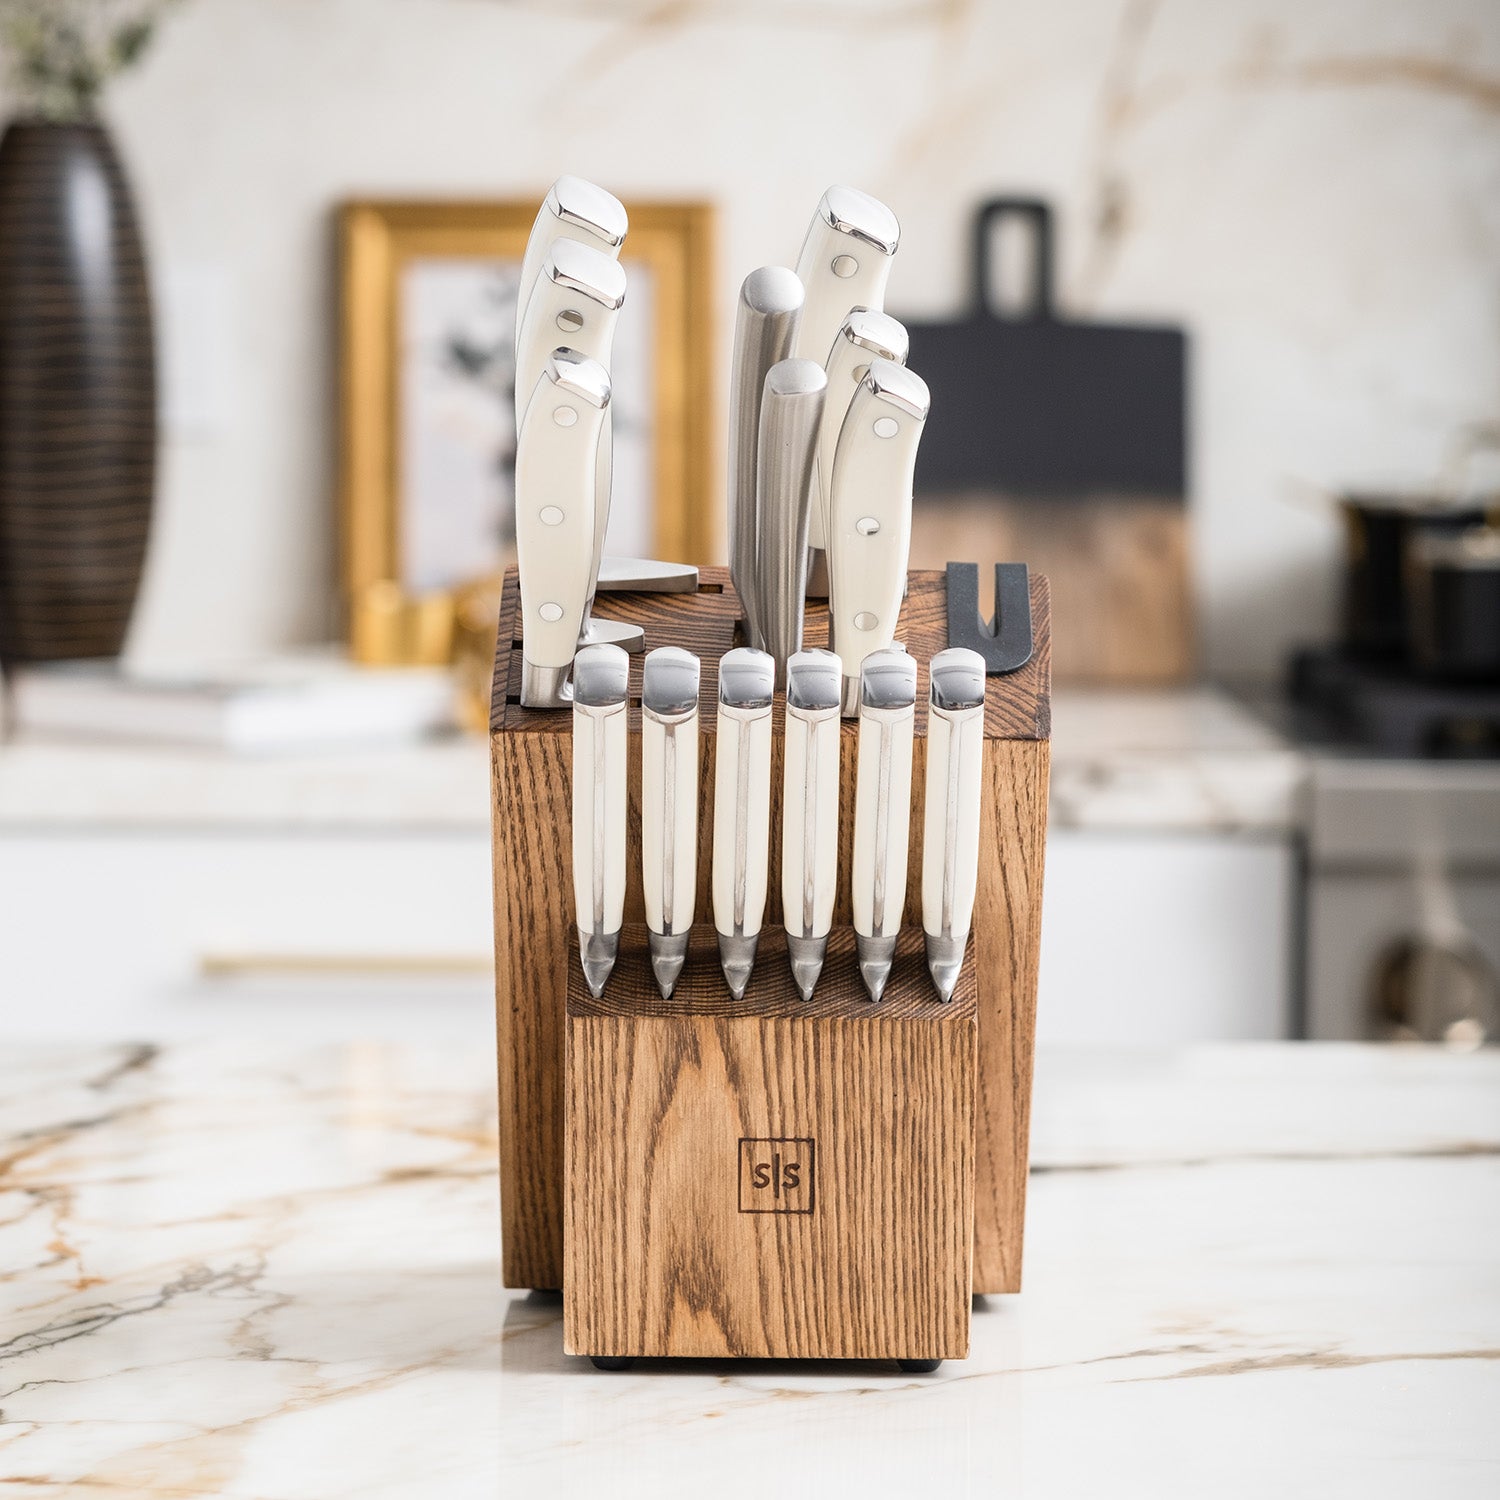 White and Silver Knife Set with Self-Sharpening Block - Styled Settings